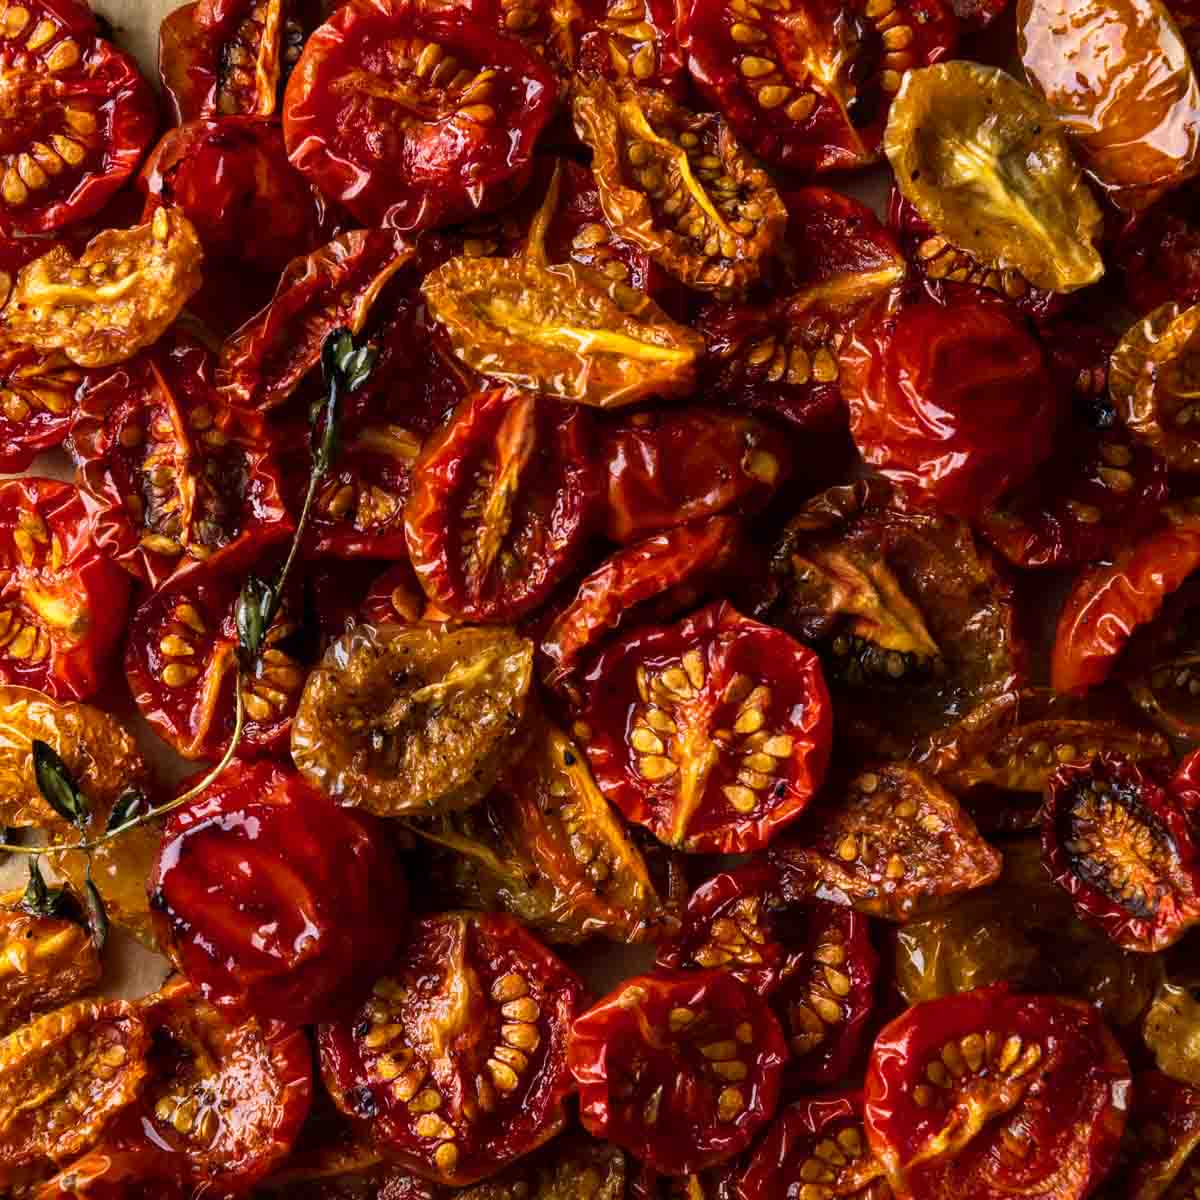 A close up image of oven roasted cherry tomatoes